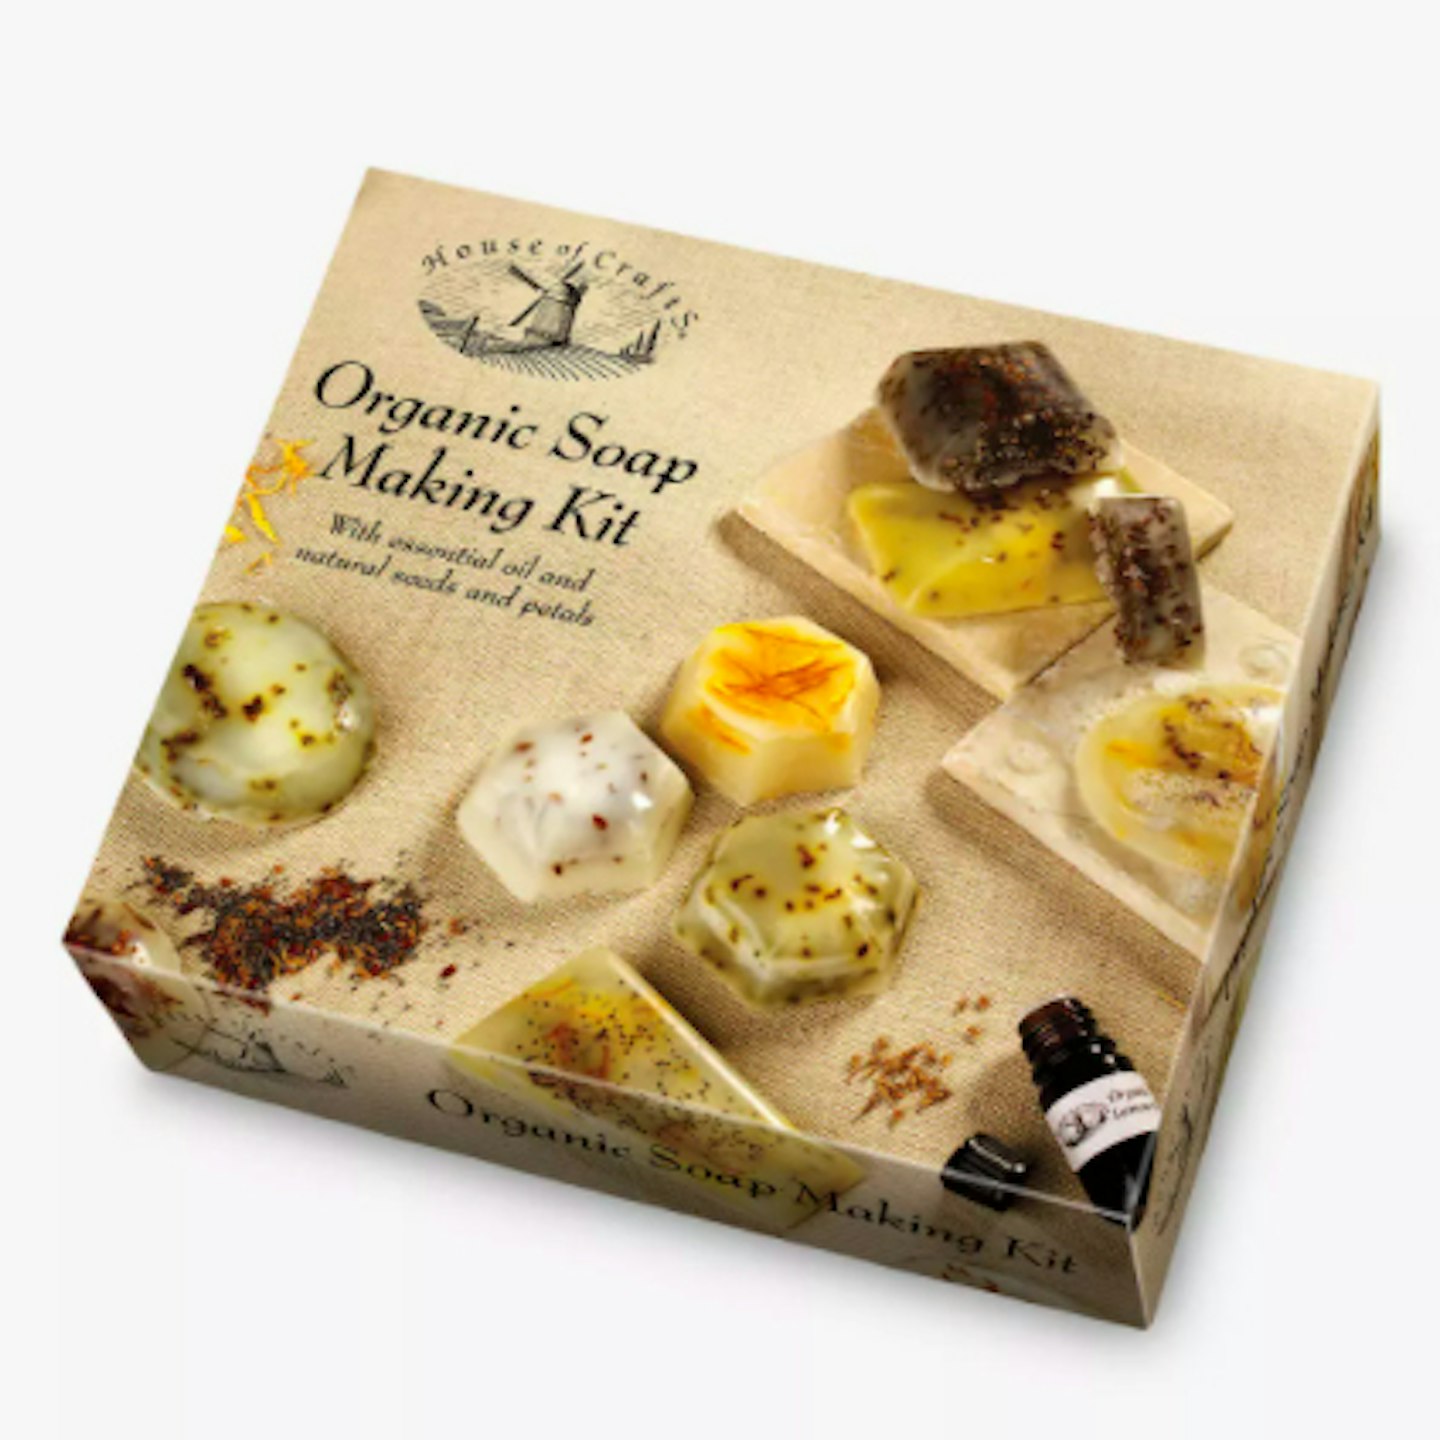 House of Crafts Organic Soap Making Kit